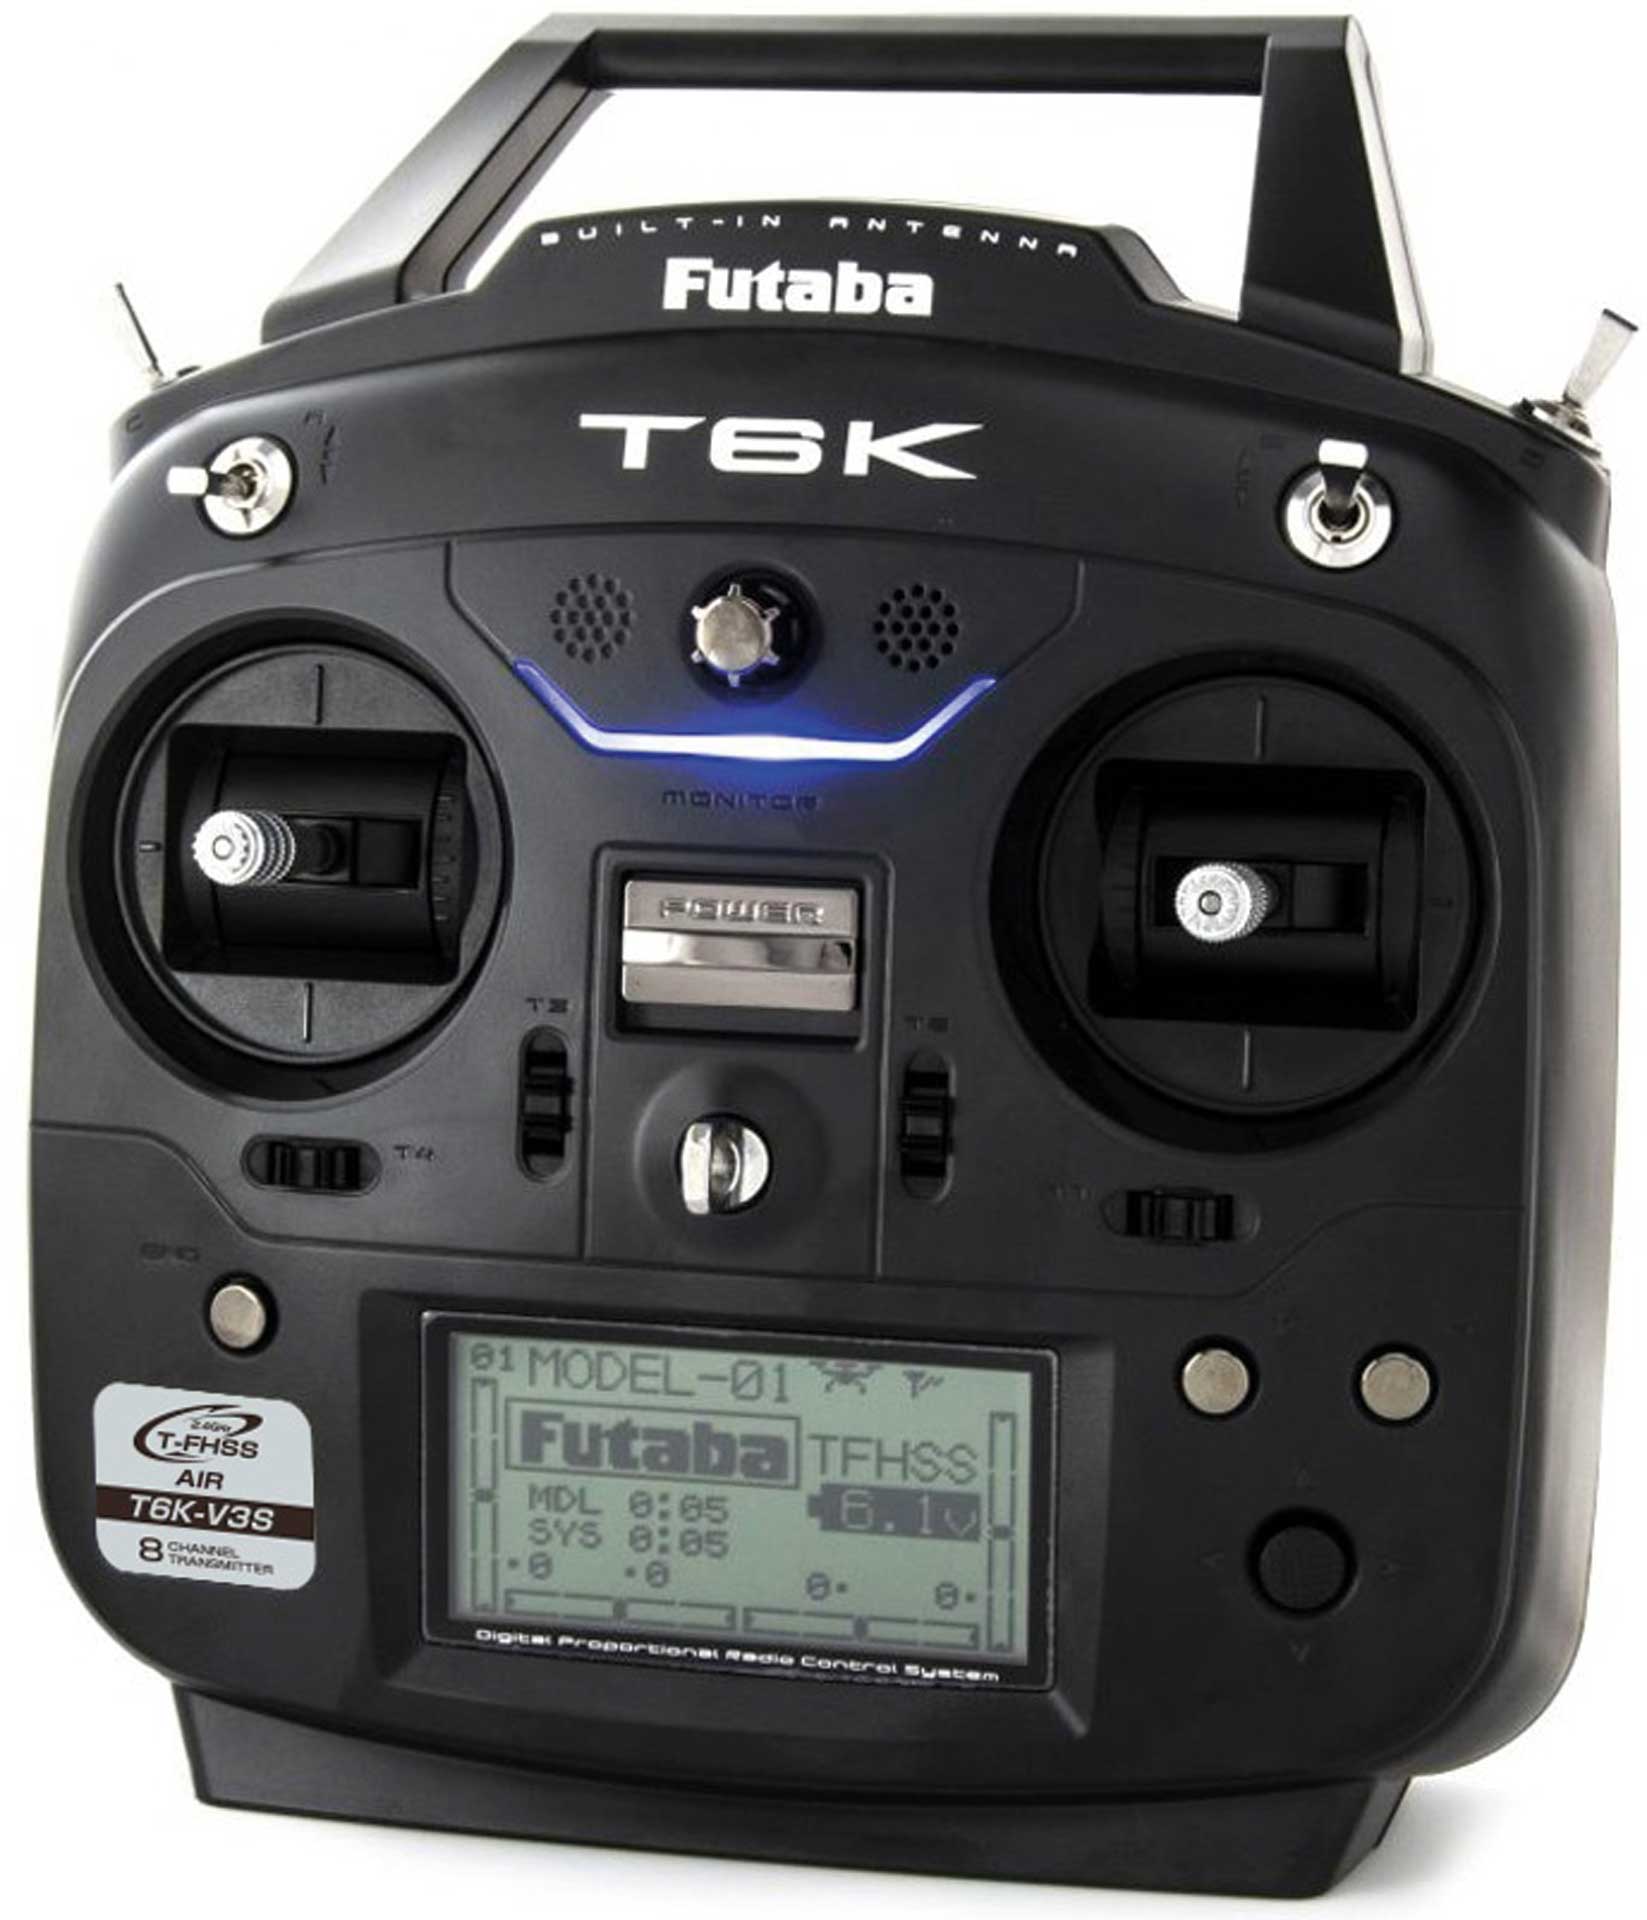 FUTABA T6K V3S 2.4GHz T-FHSS+R3008SB Mode 1 8Channel with Telemetry